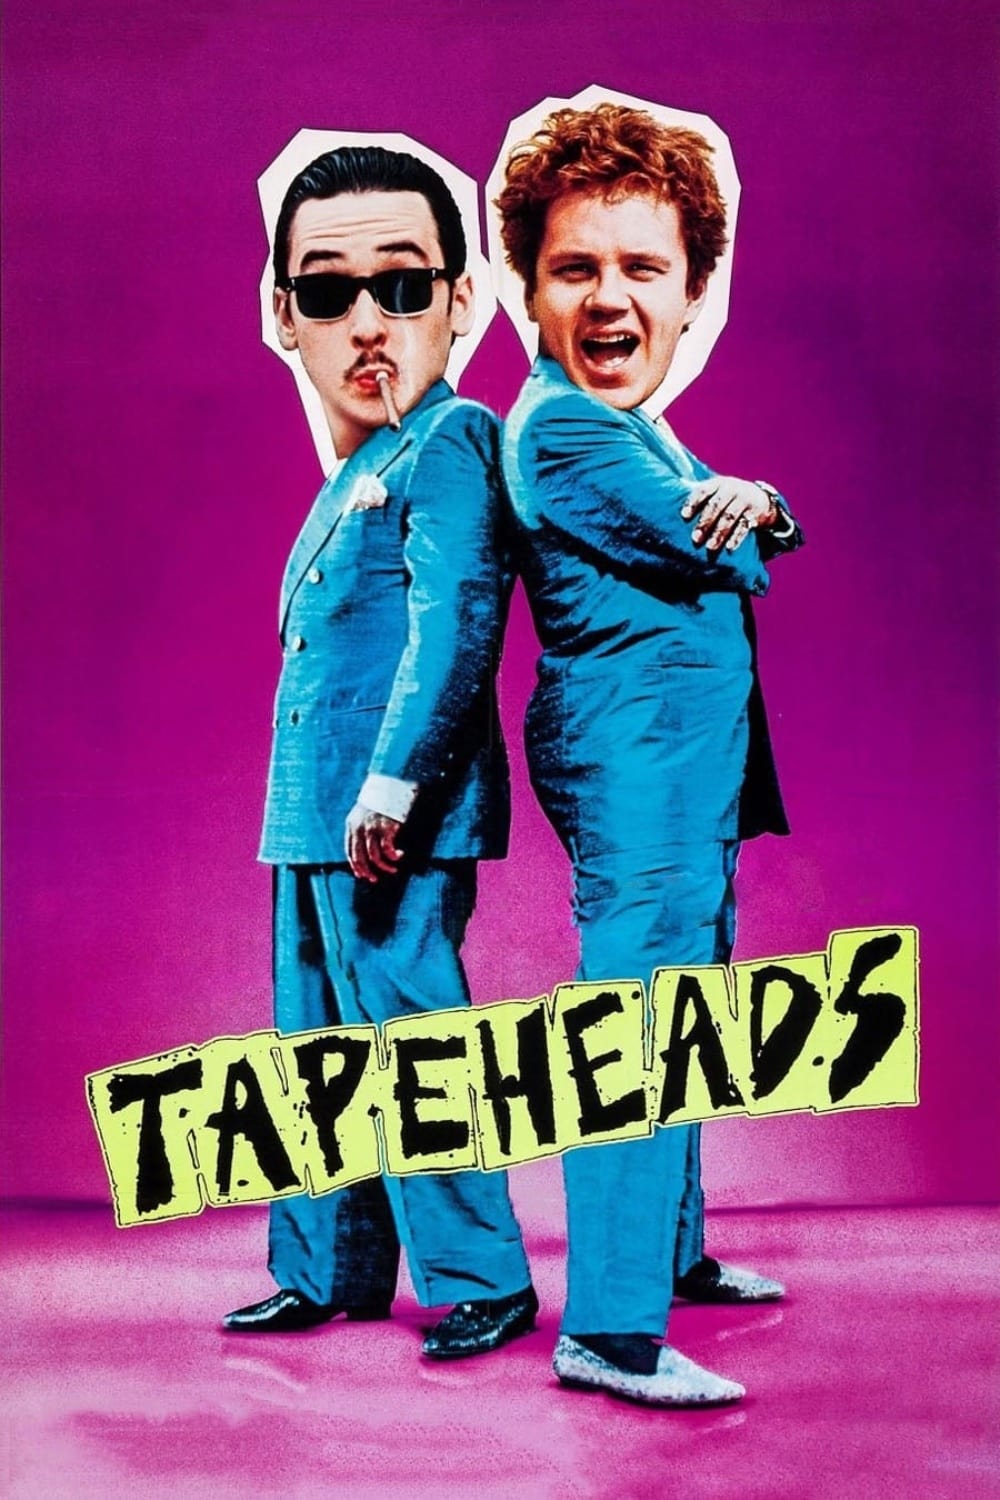 Tapeheads (1988)